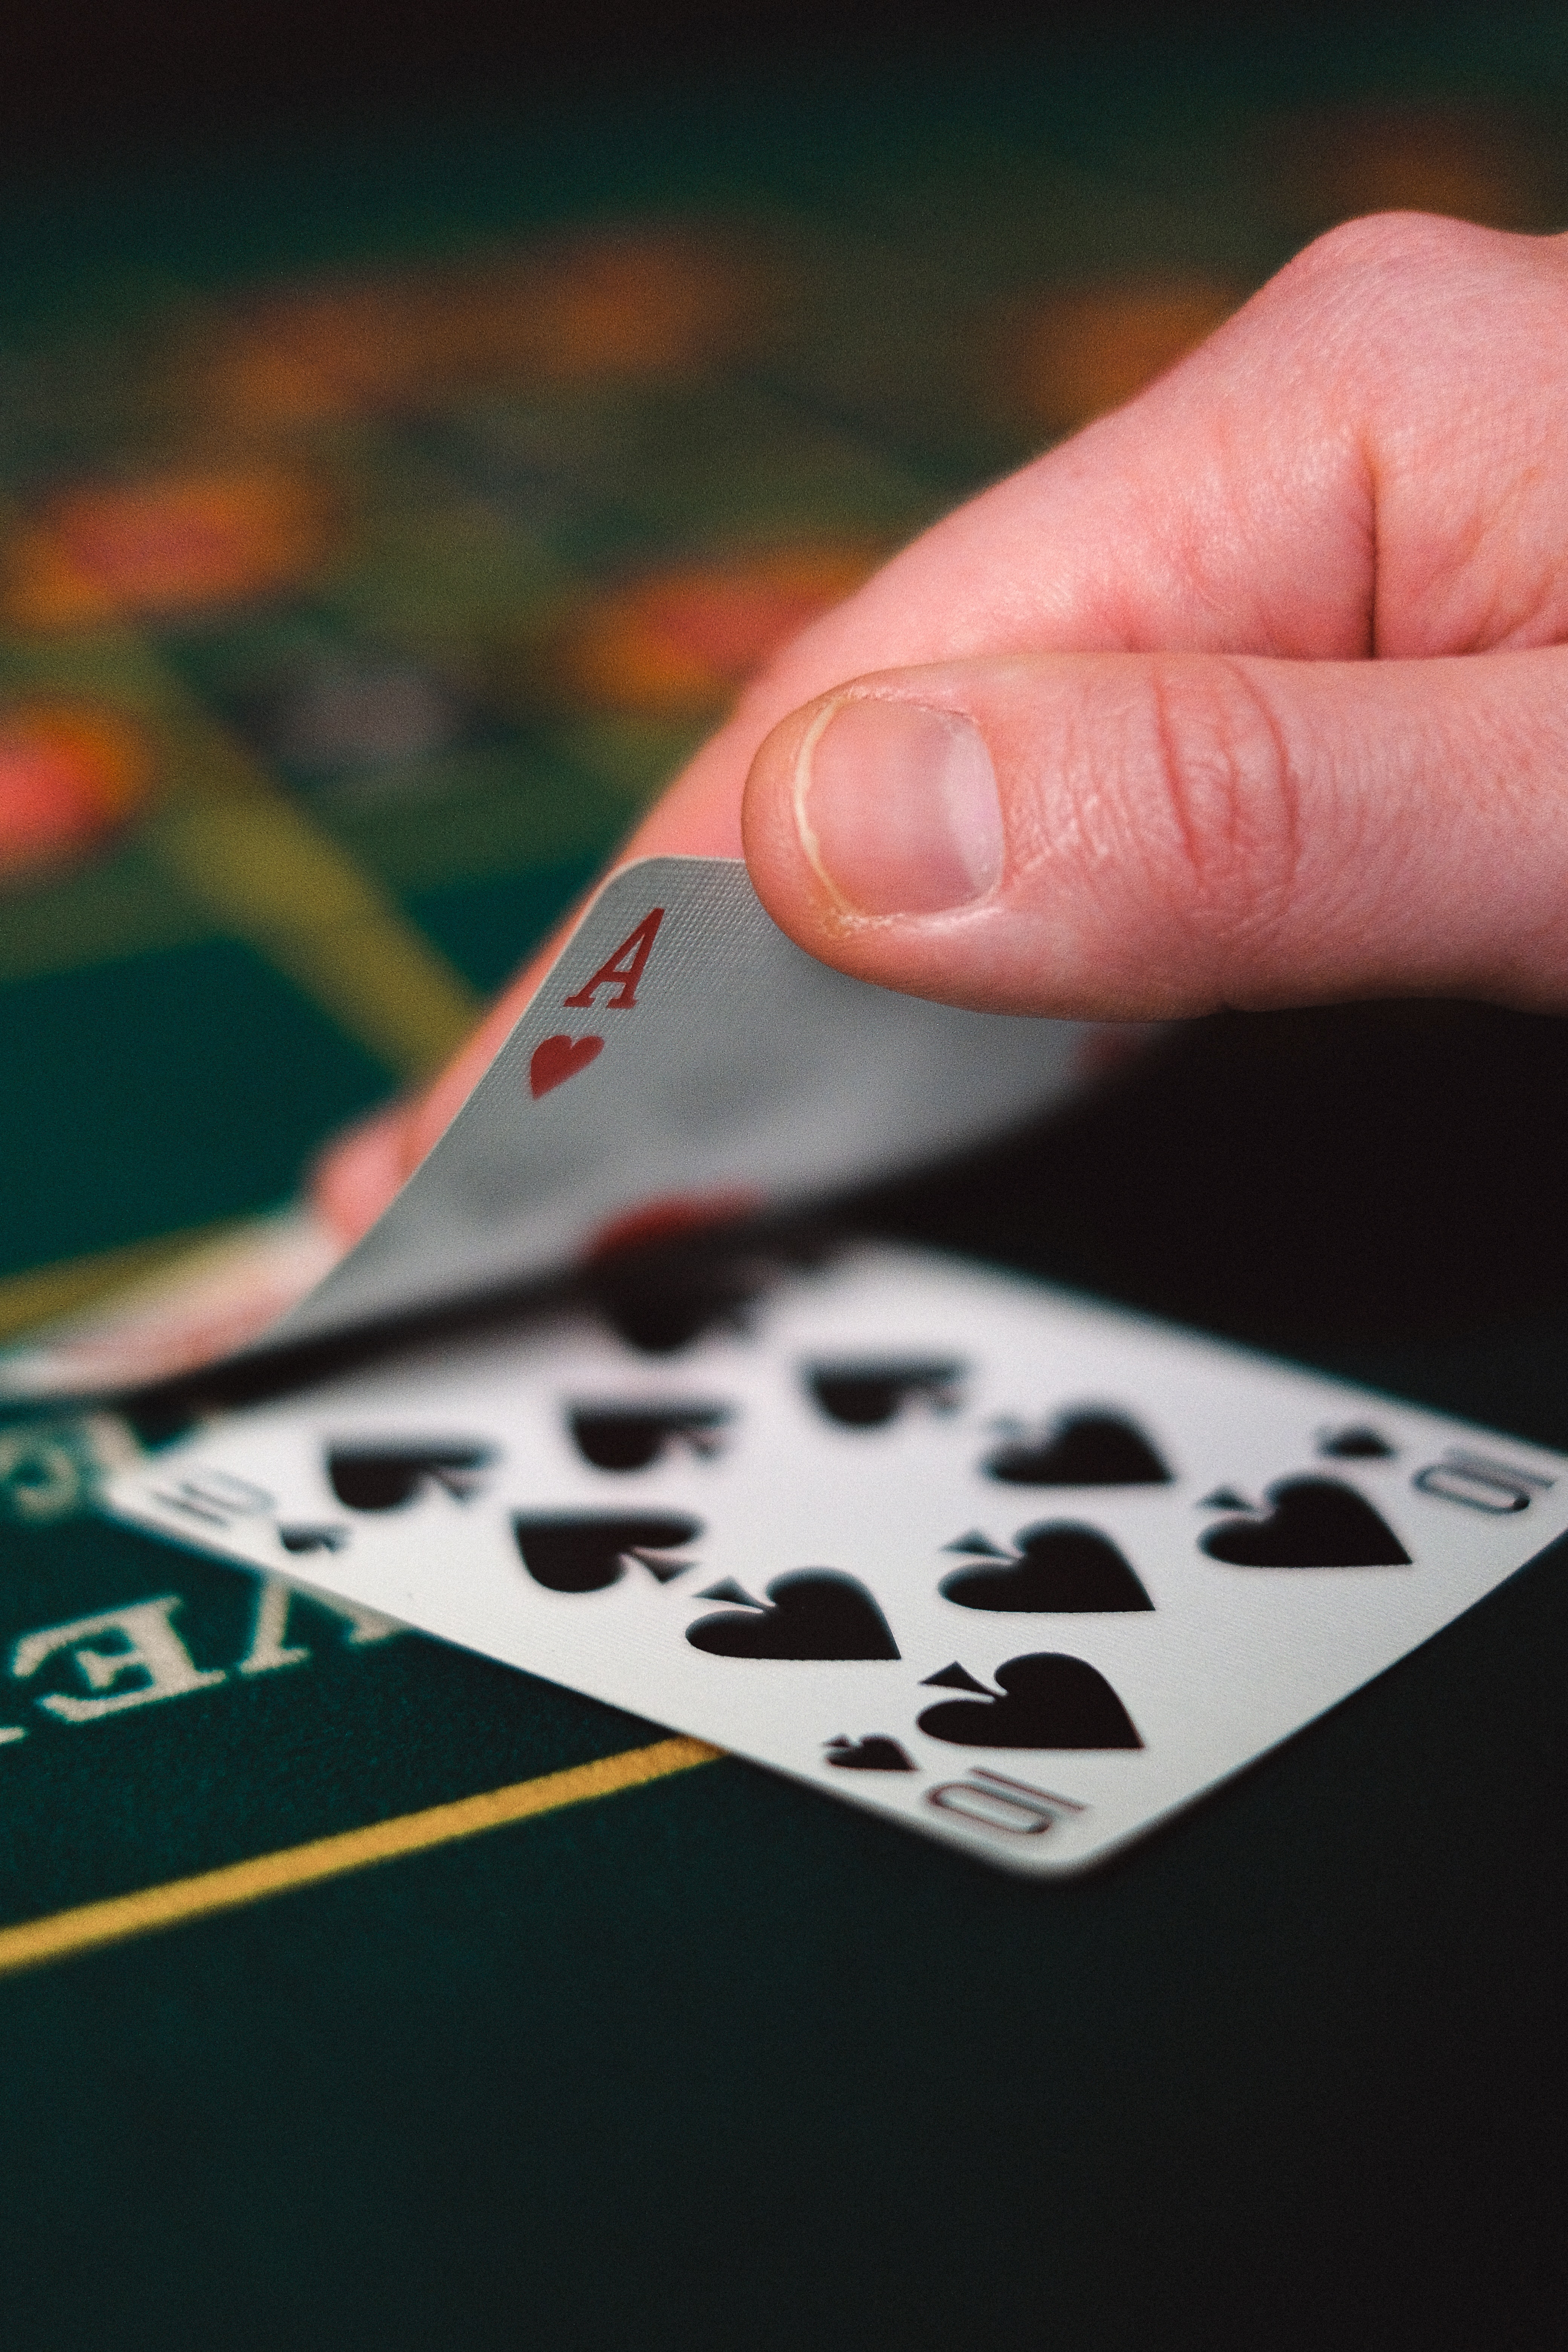 Photo by Anna Shvets: https://www.pexels.com/photo/a-person-holding-gaming-cards-6664195/